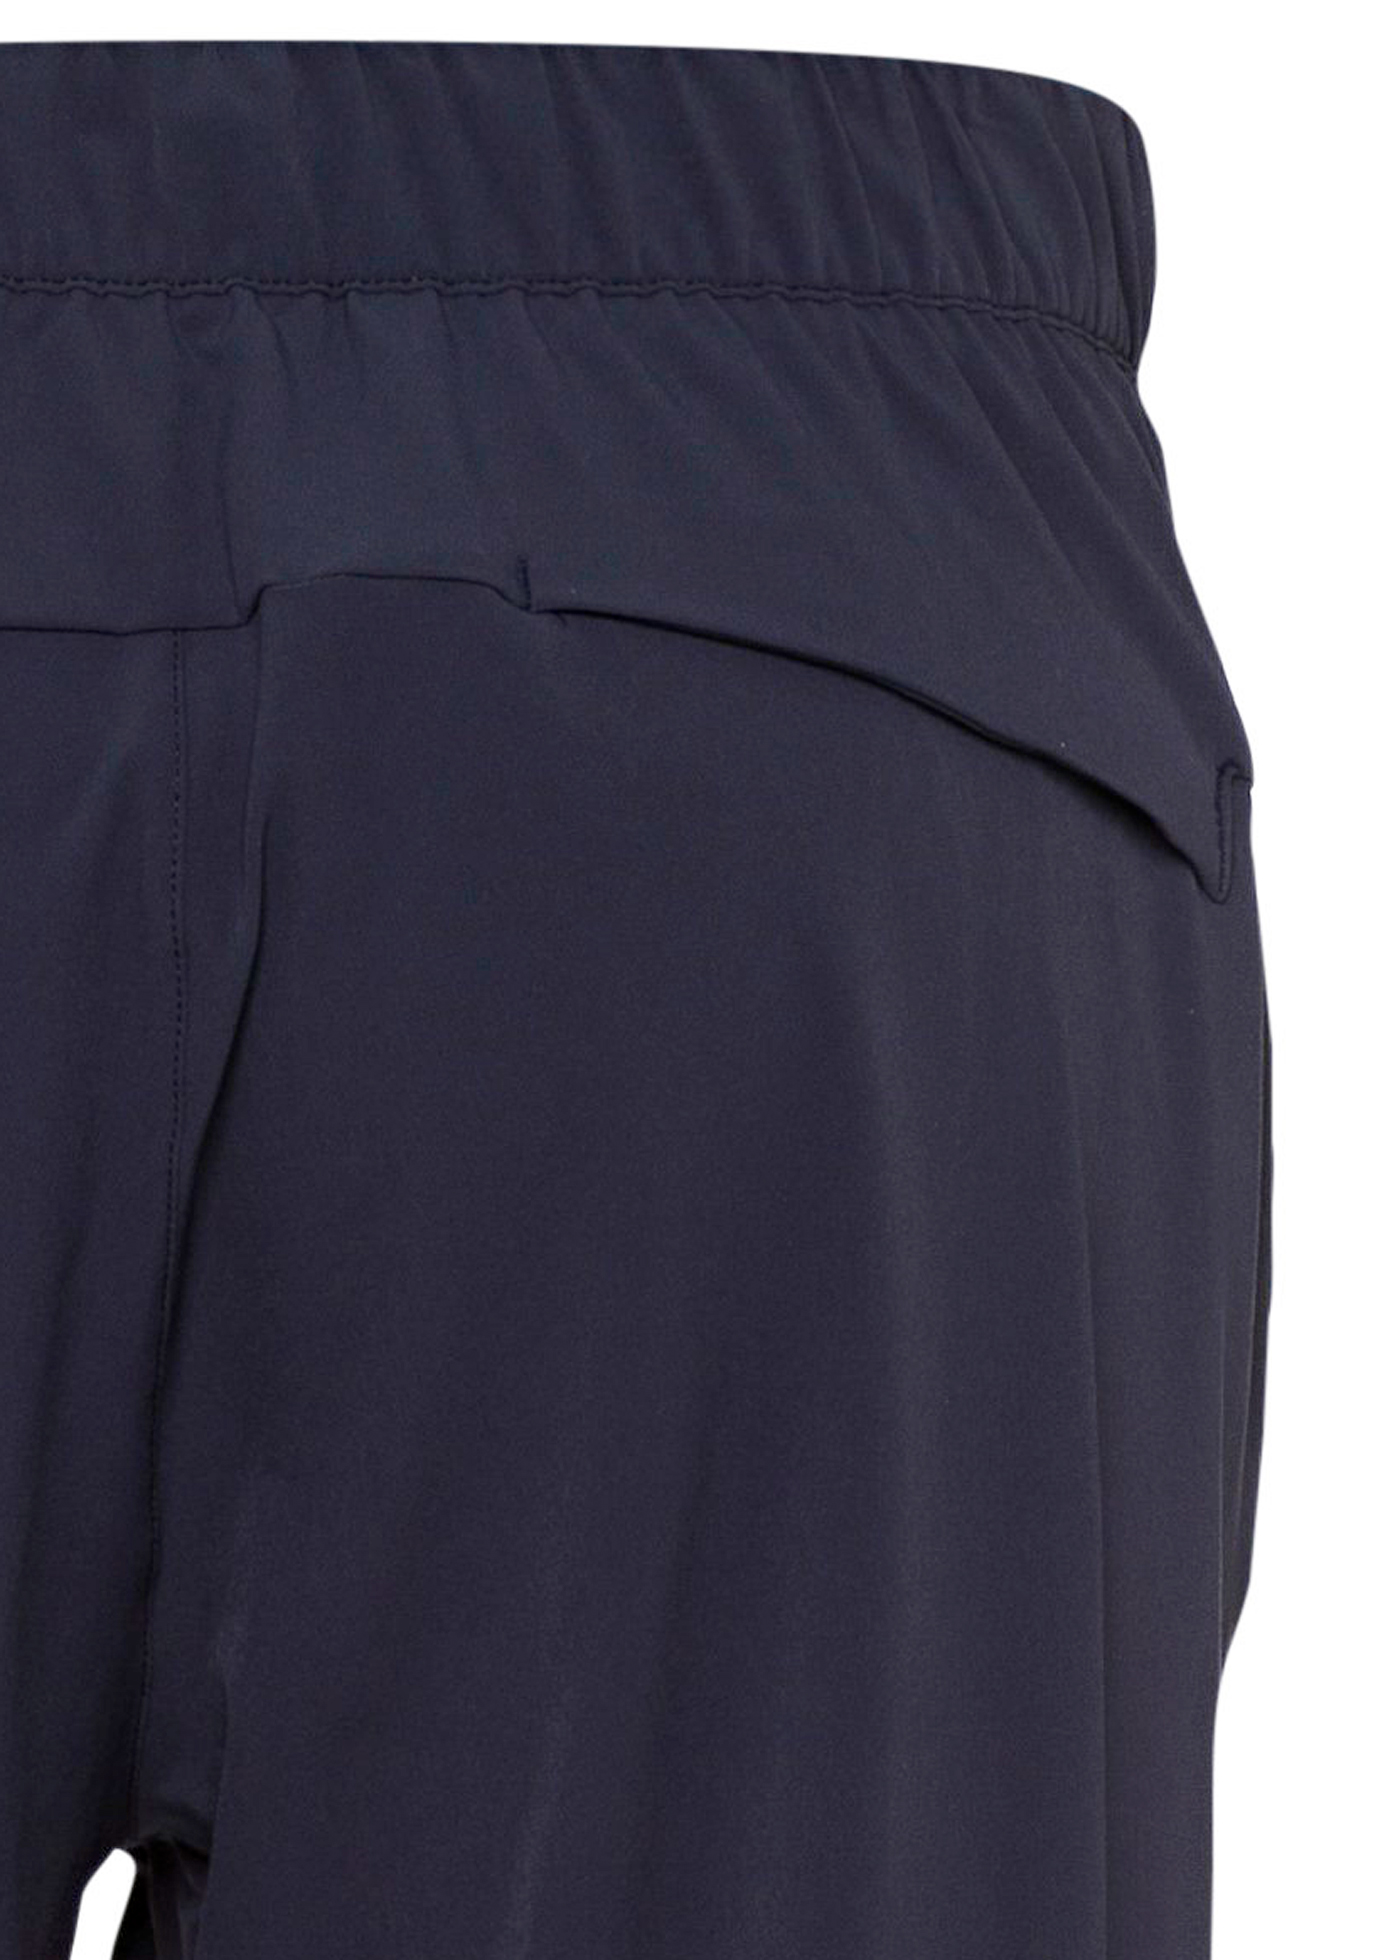 ACTIVE PANTS M NAVY M image number 3